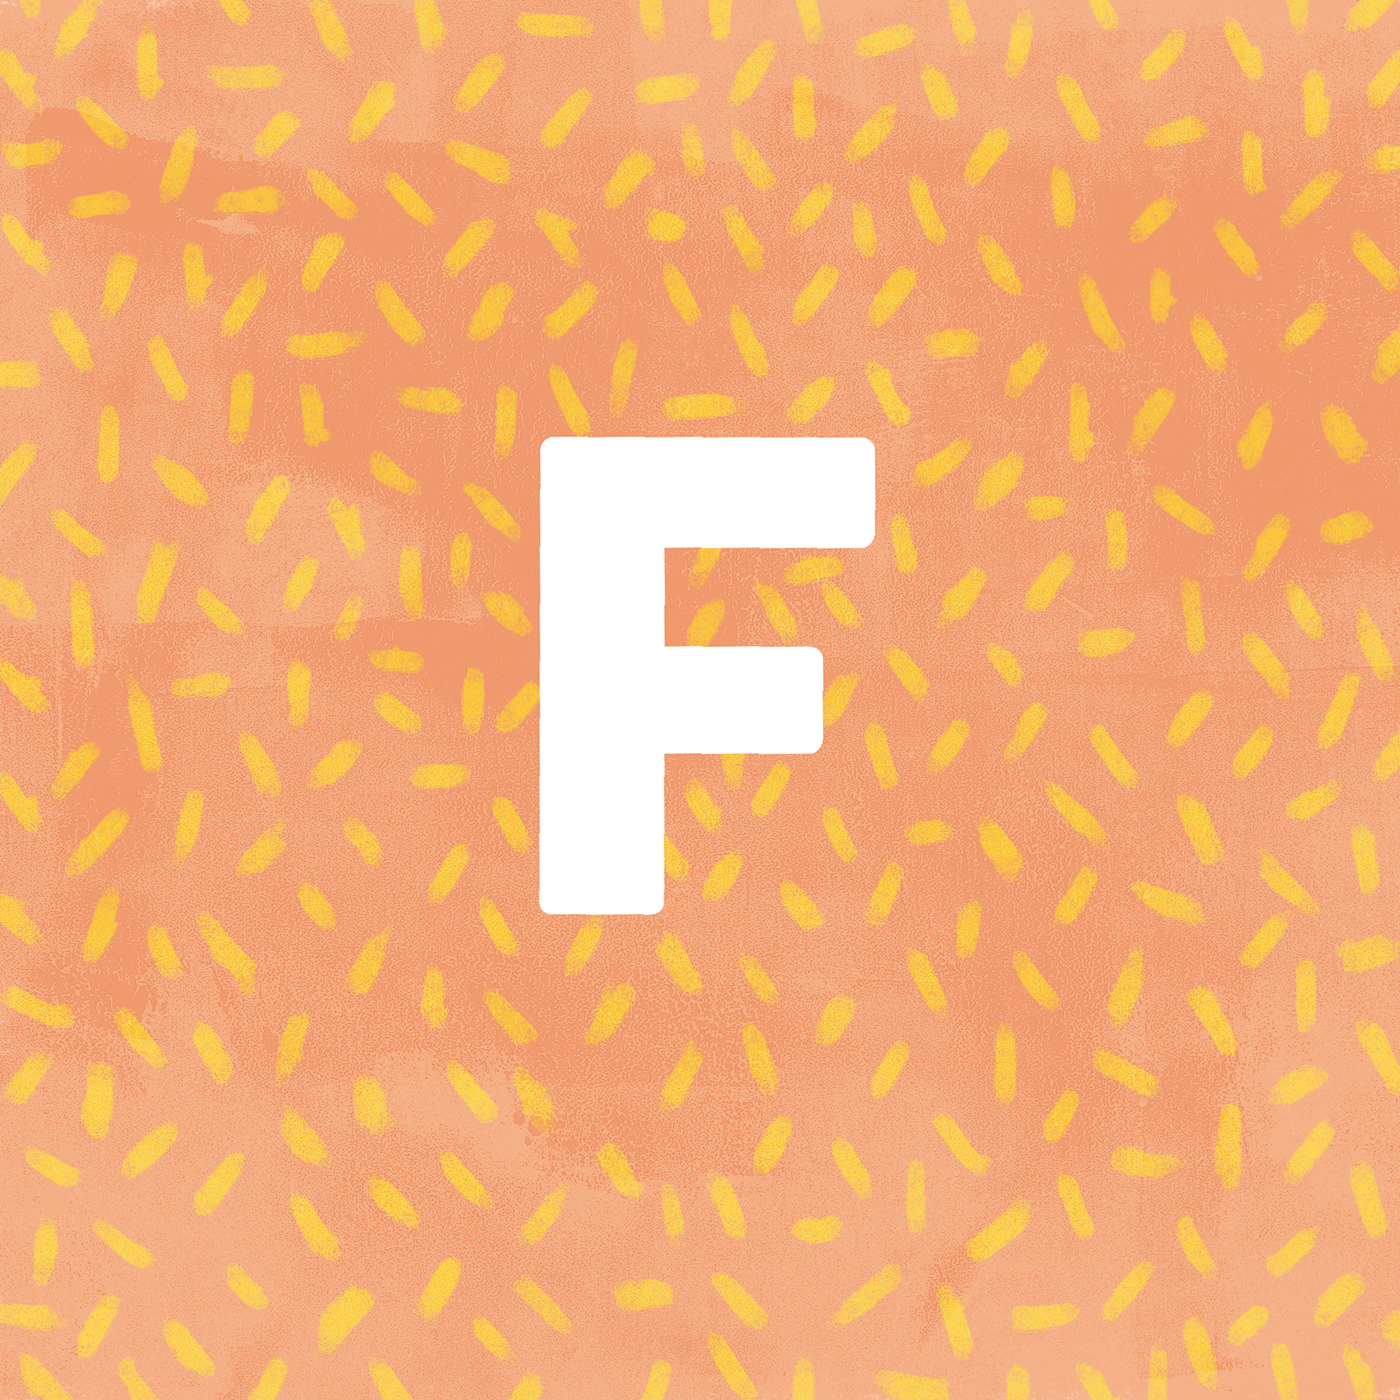 the letter f letter F forest Fungi fire fish Fun stop motion stop frame stop frame animation Ps25Under25 creativecloud adobeillustrators Between10and5 Photoshop Animation